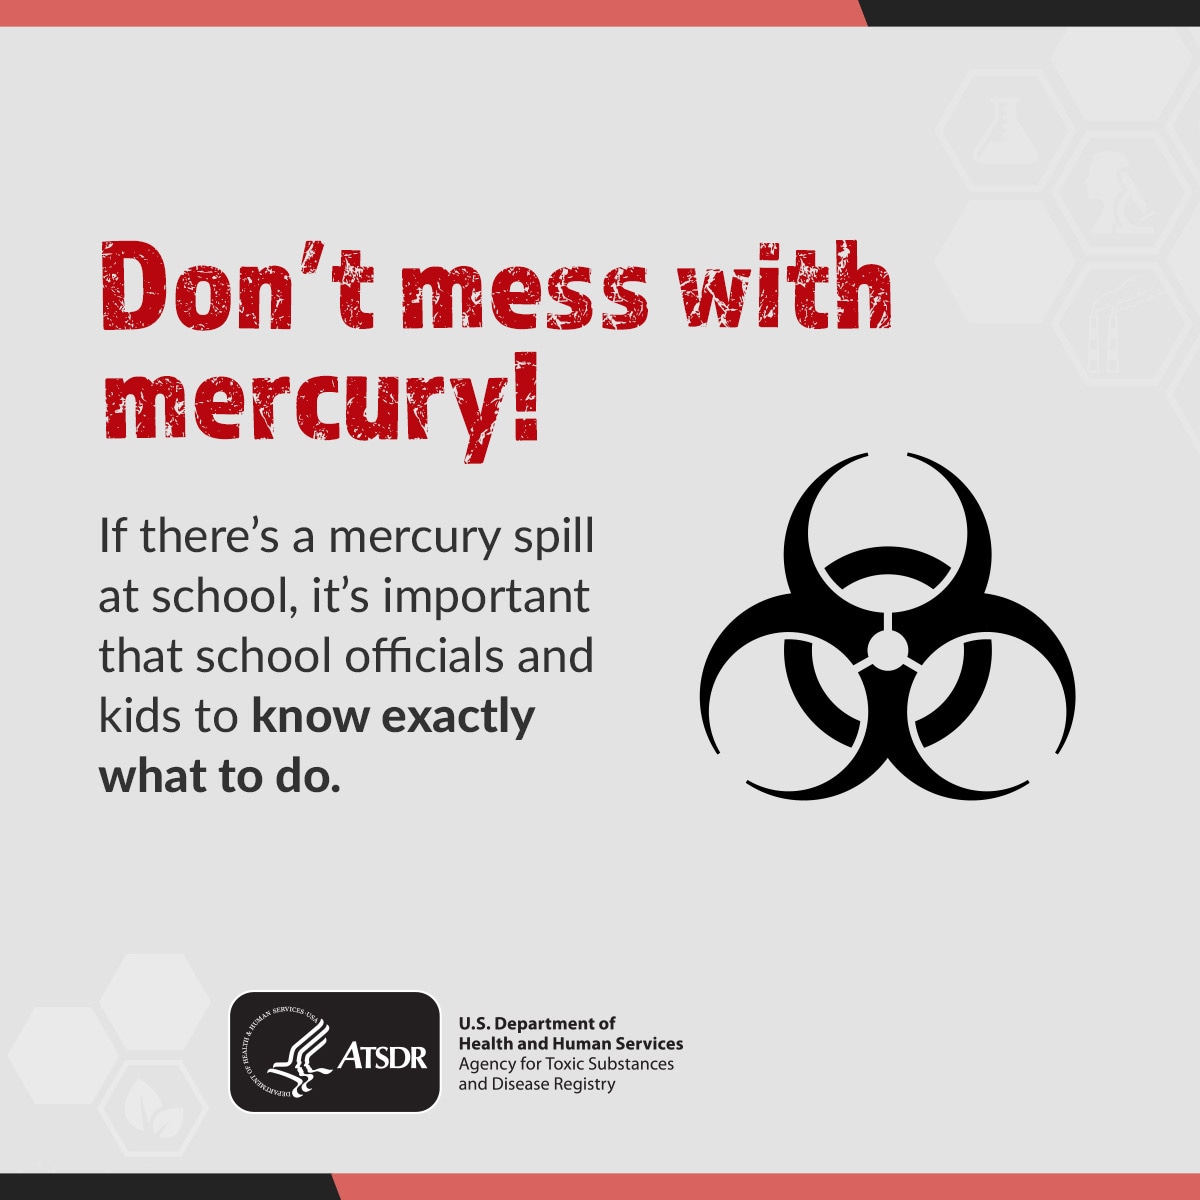 Don't mess with mercury! If there's a mercury spill at school, it's important that school officials and kids to know exactly what to do.